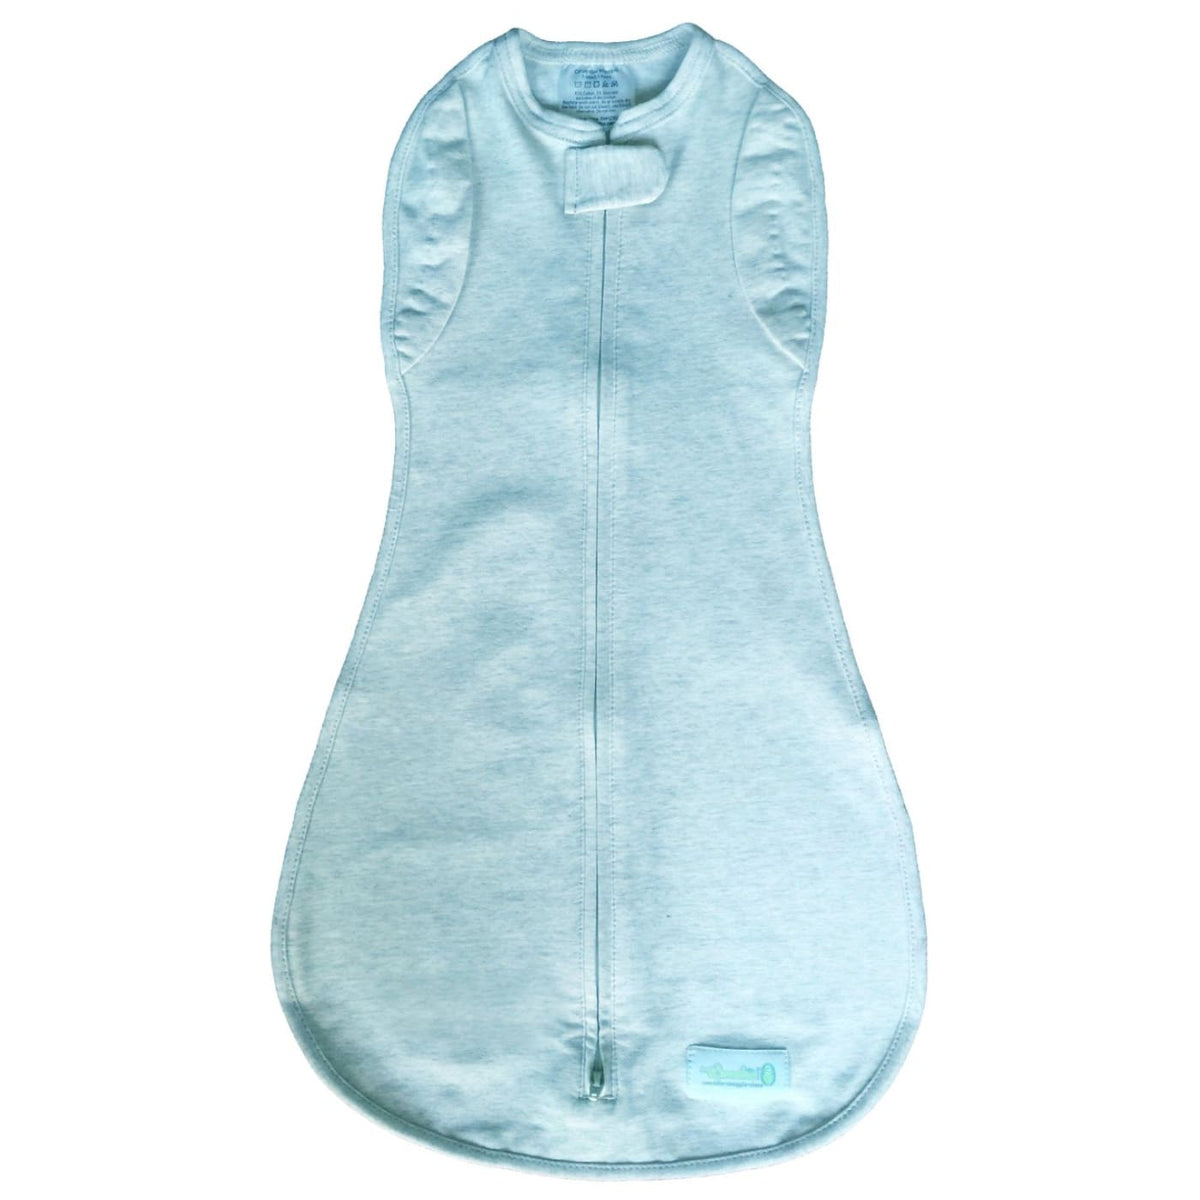 Woombie Convertible Original Dream On - Big Baby - Wraps and Swaddles